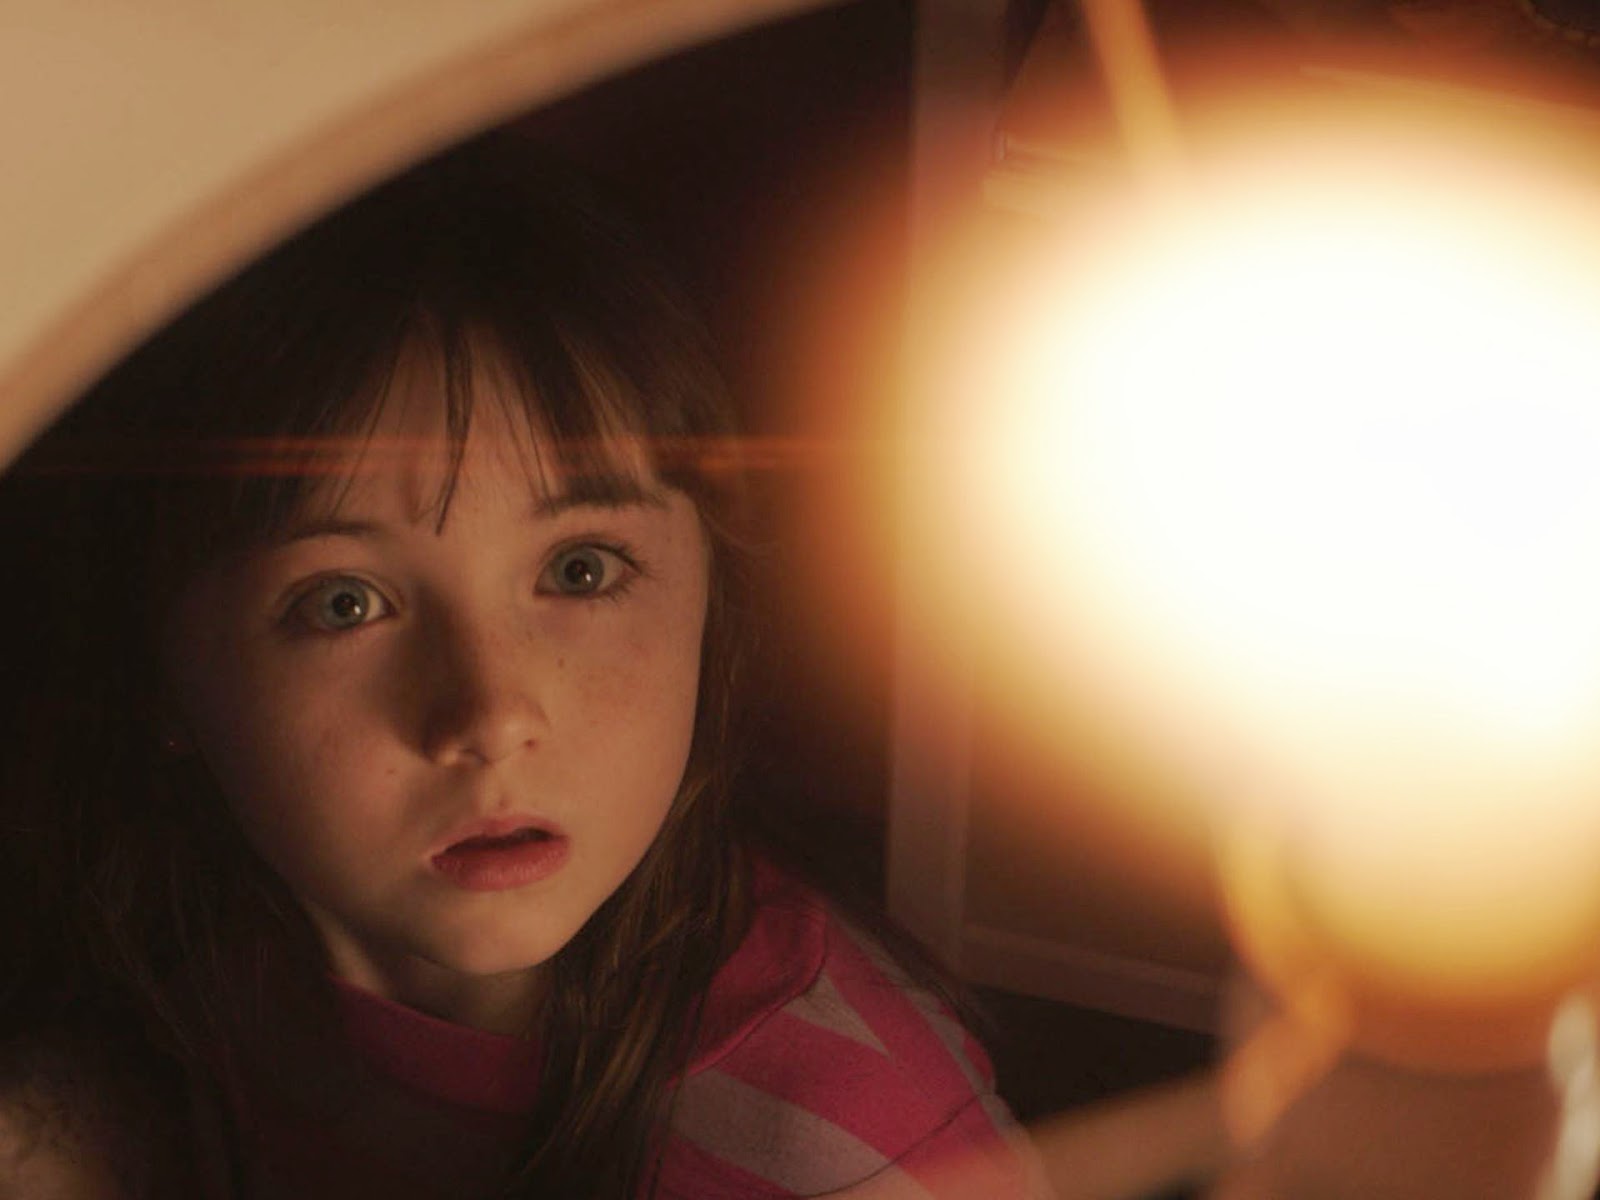 Poltergeist Trailer and Poster of the remake! : Teaser Trailer1600 x 1200